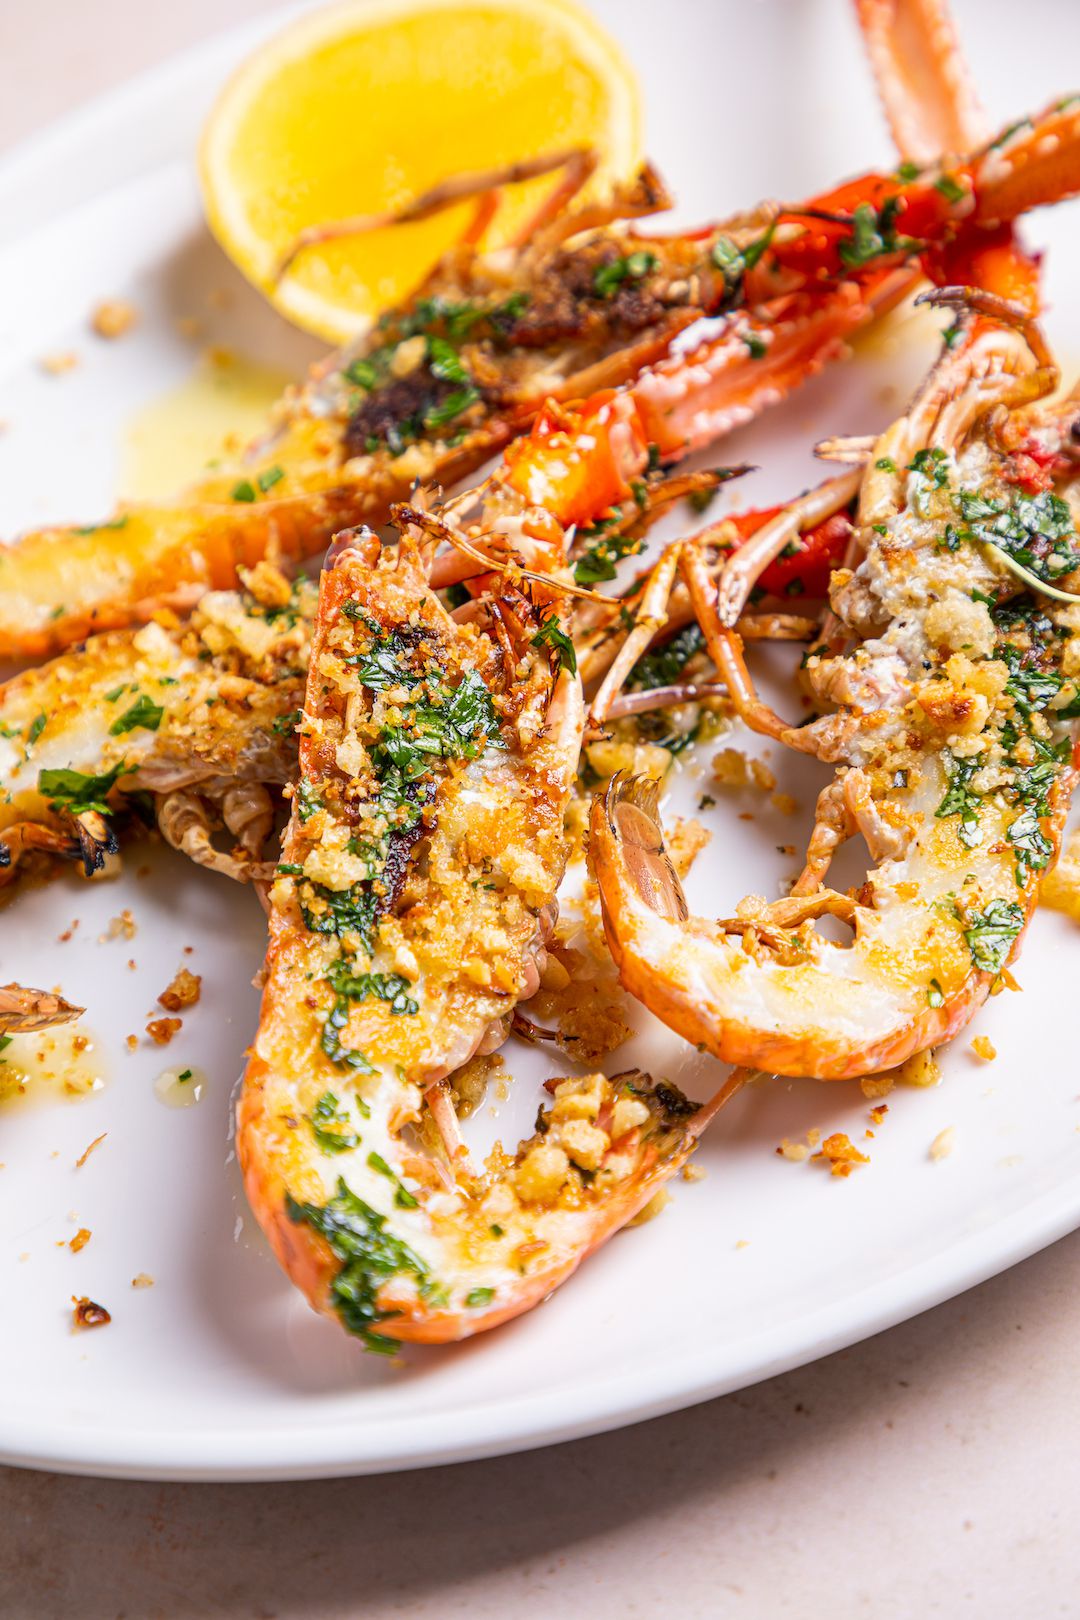 Grilled langoustines with lemon, the kind of dish Saborcito diners can expect.